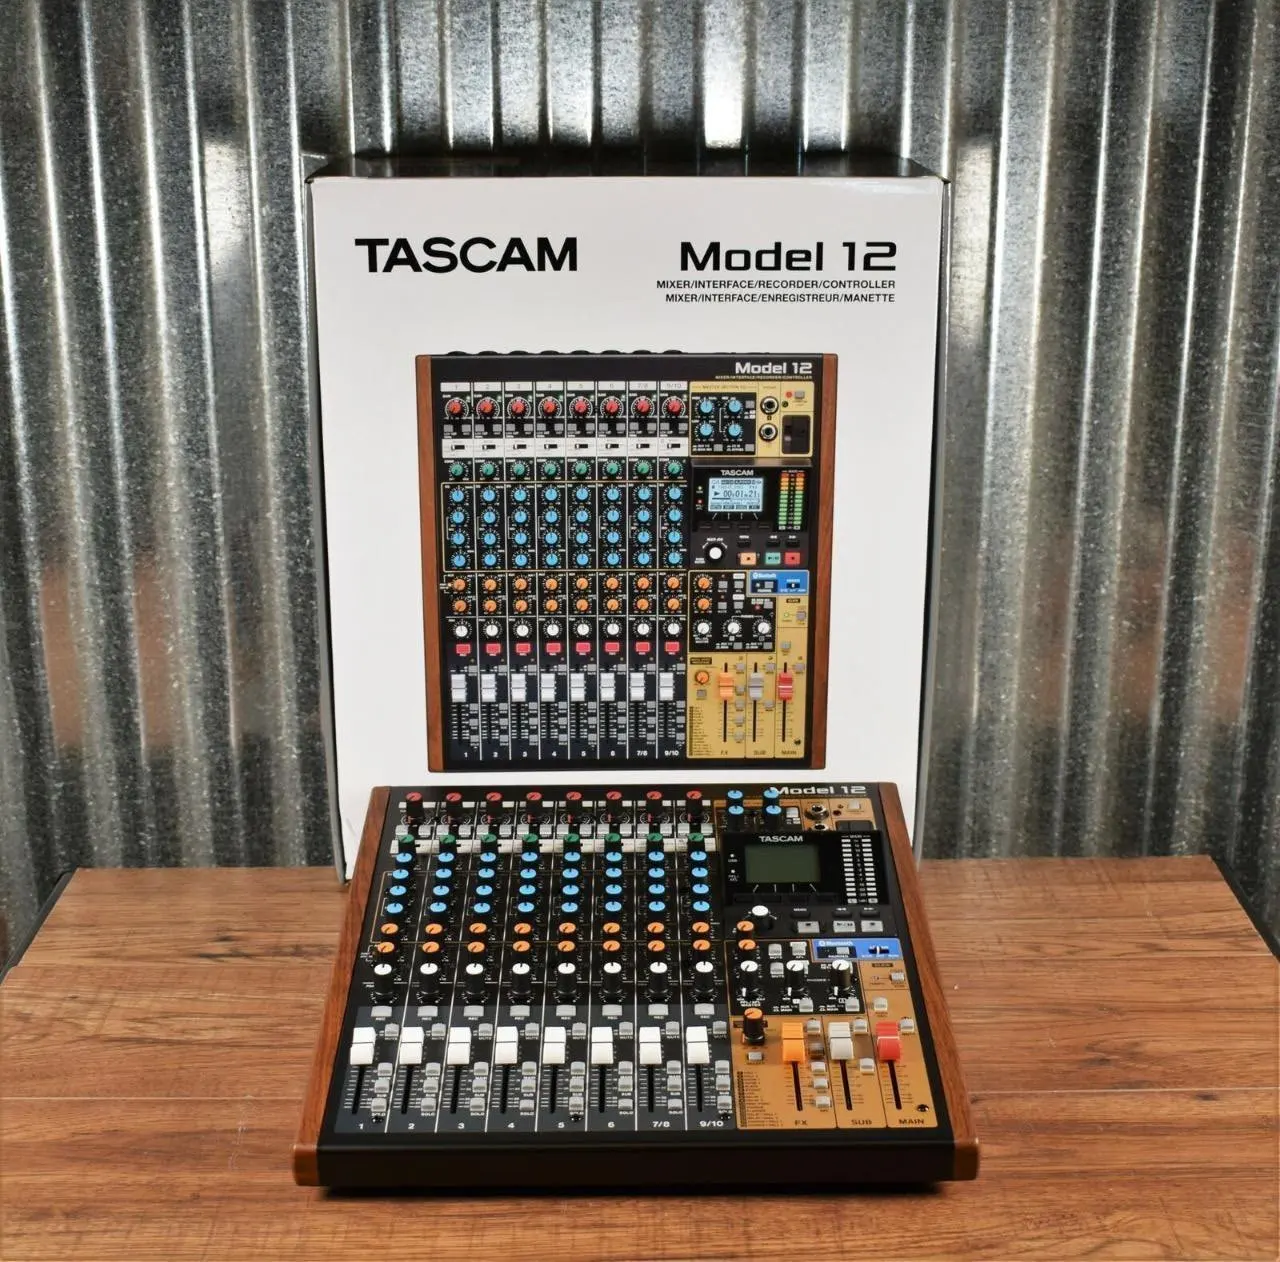 

100% SUMMER DISCOUNT SALES ON TASCAM Model 12 Mixer / Interface / Recorder / Controller